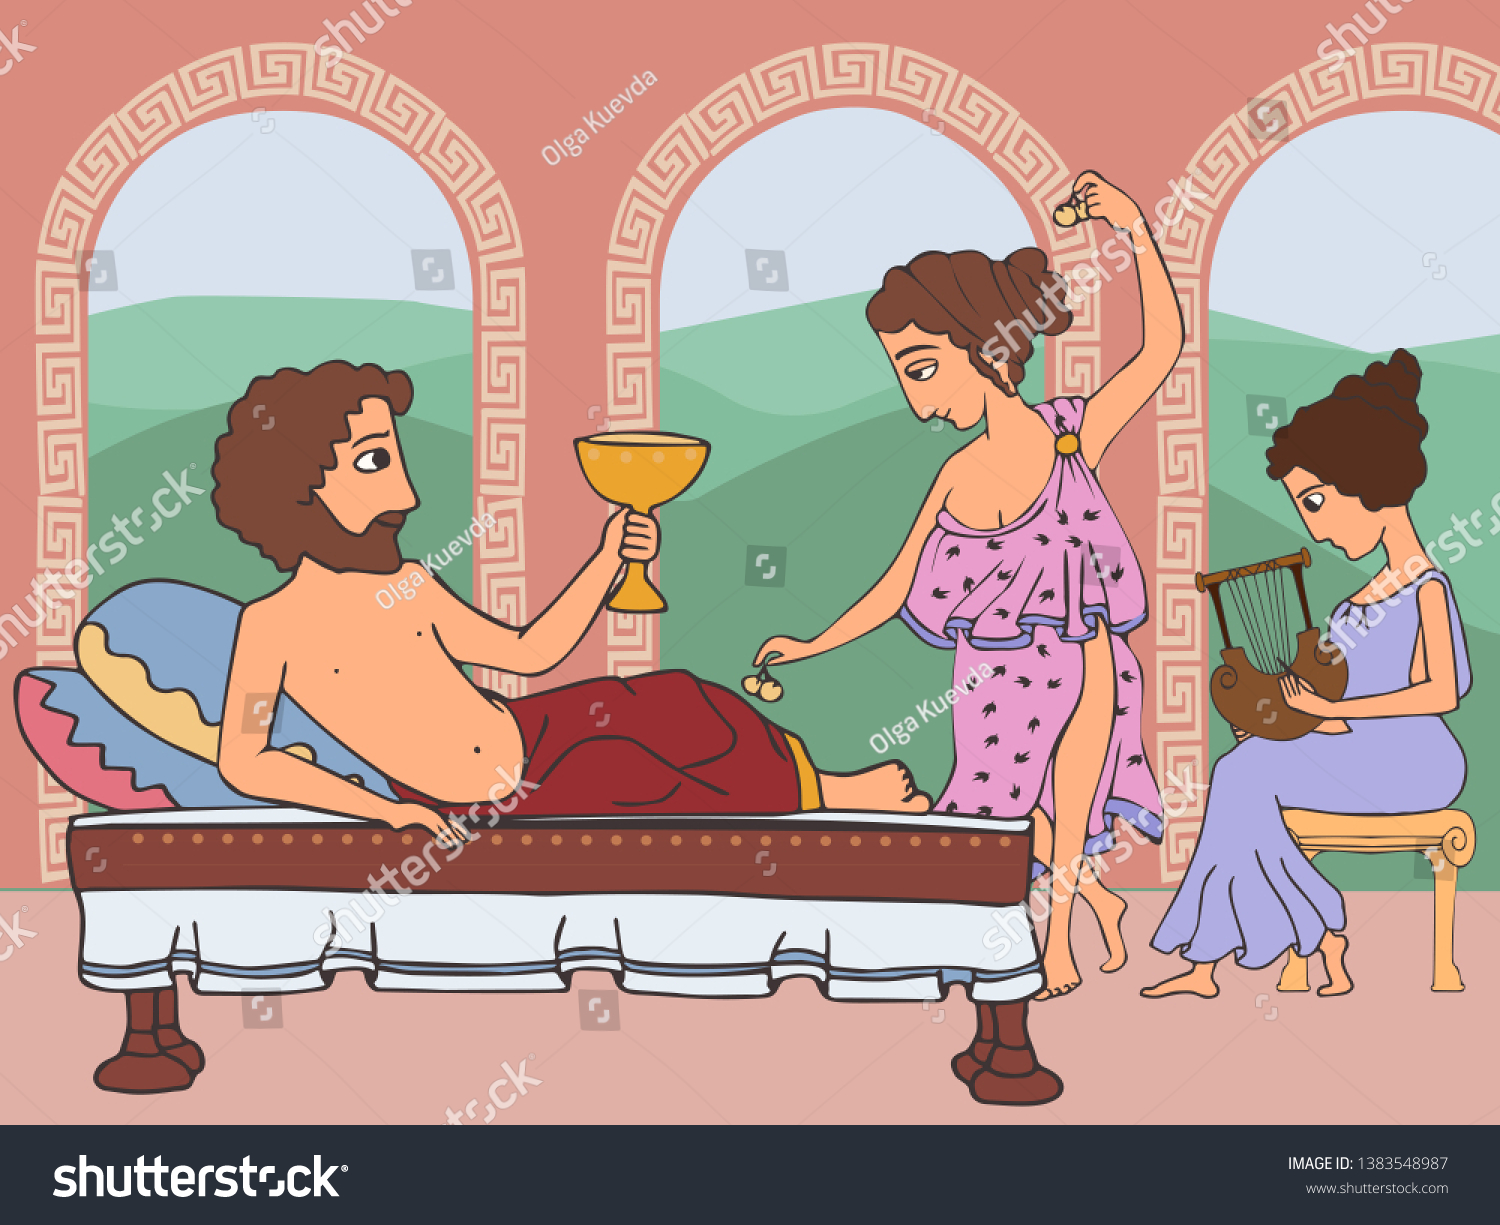 SVG of ancient greek hedonist, funny vector cartoon illustration of historical practices svg